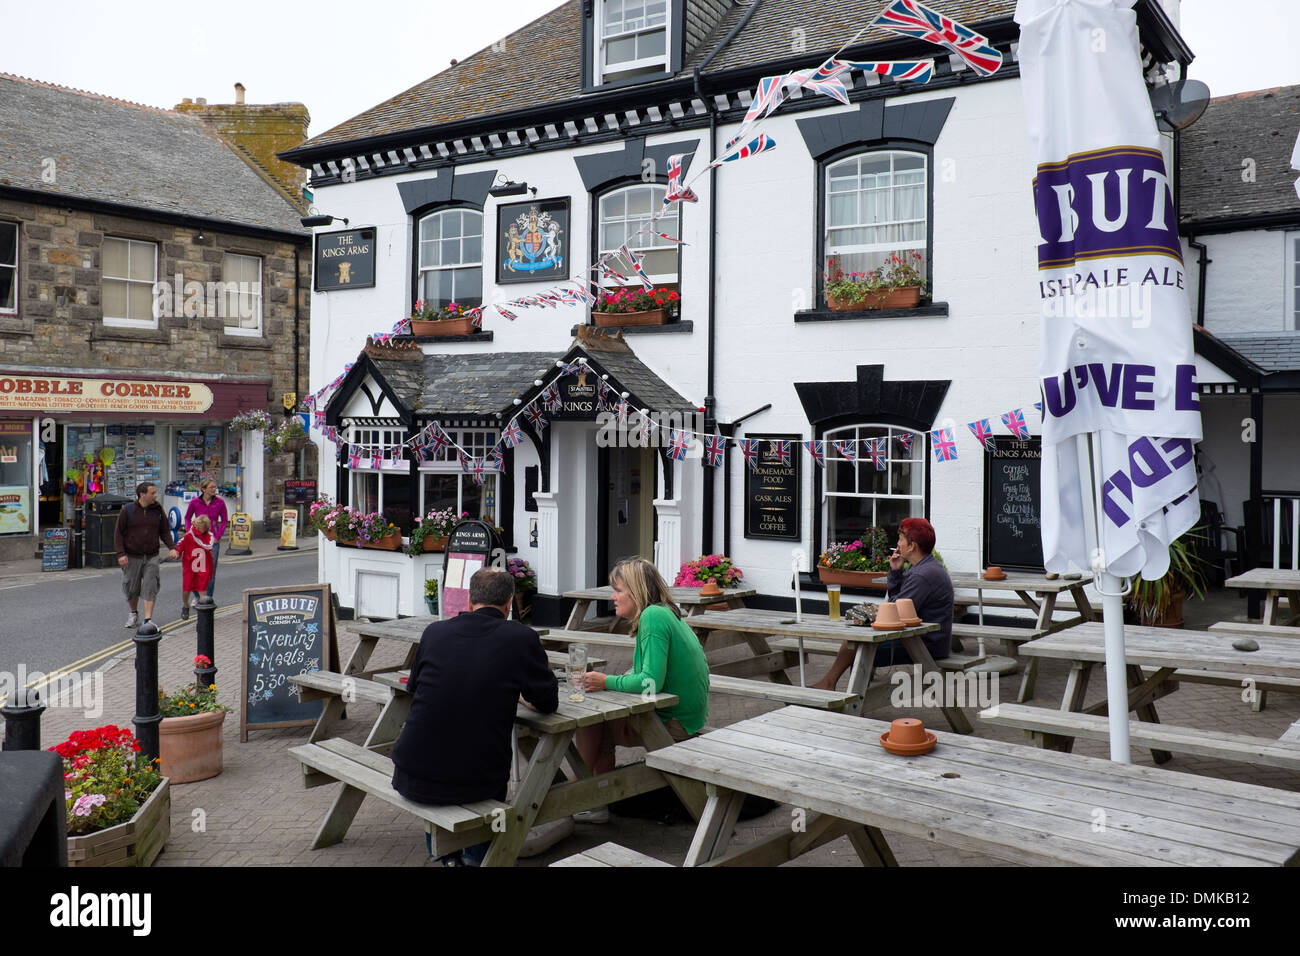 People outside pub tables outdoor drinking beer Stock Photo